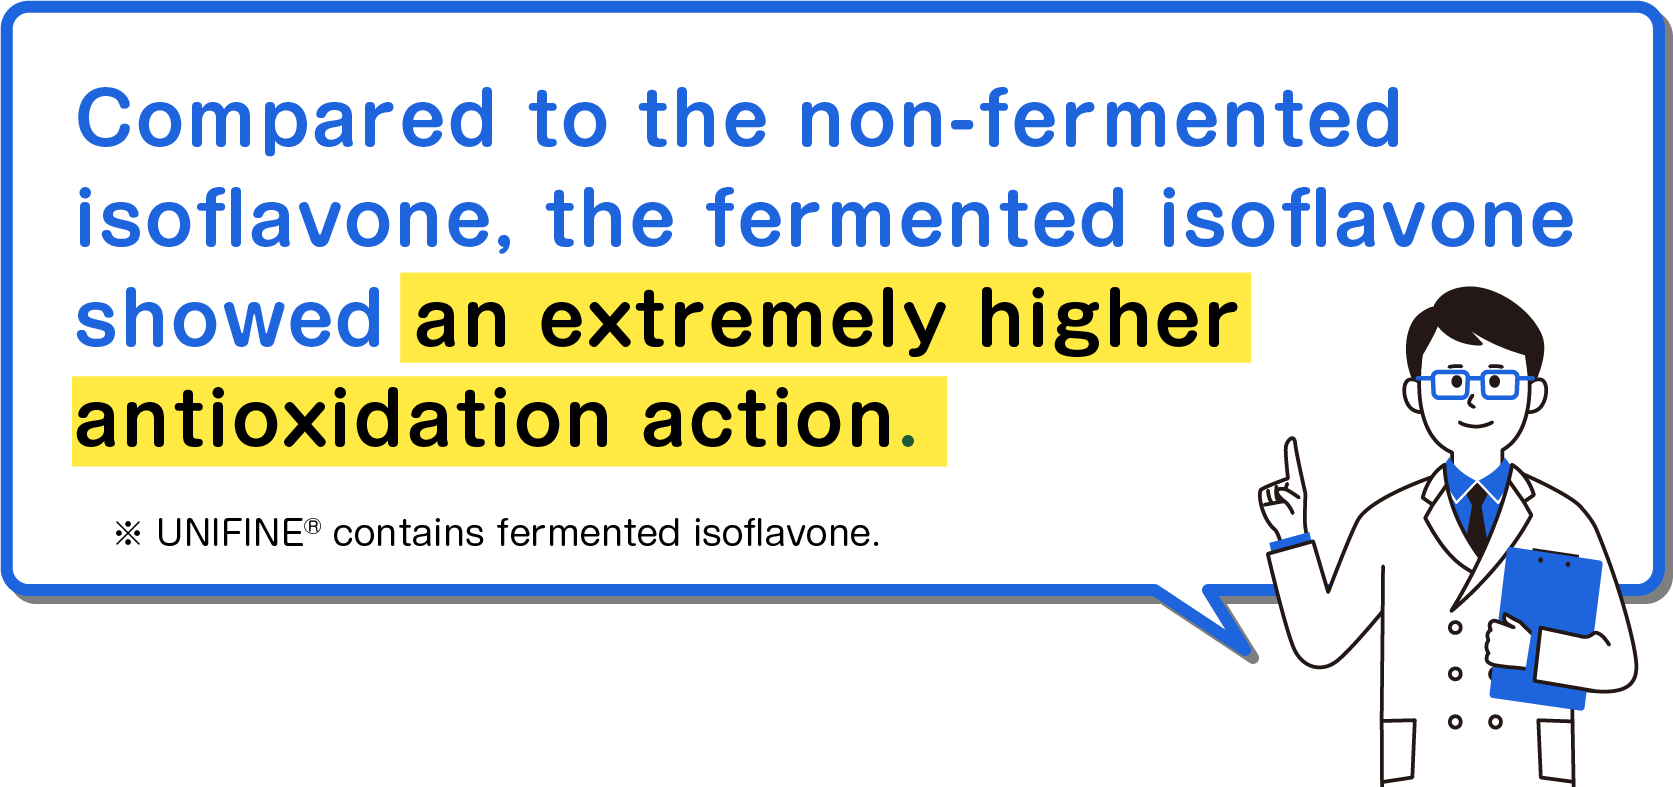 Compared to the non-fermented isoflavone, the fermented isoflavone showed an extremely higher antioxidation action.*UNIFINE® contains fermented isoflavone.